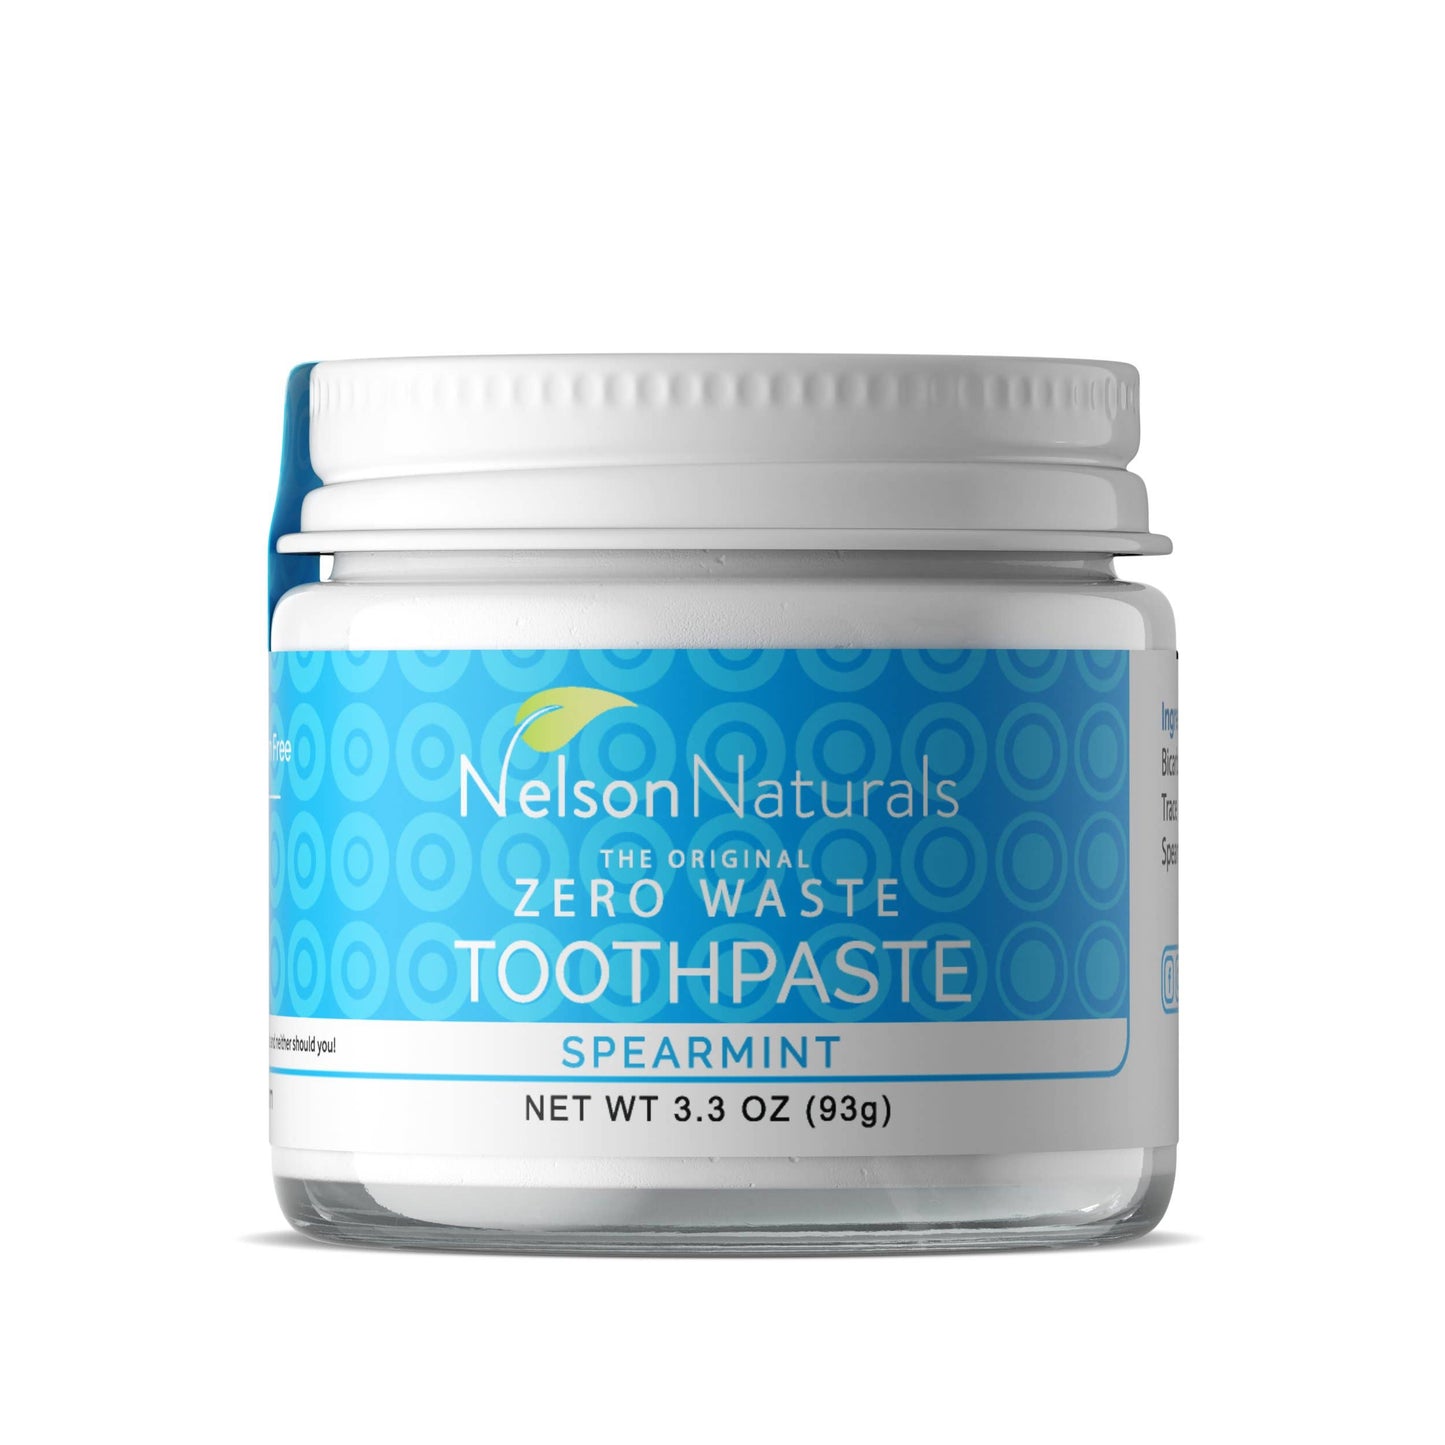 Nelson Naturals Spearmint Toothpaste in Glass Jar - 93g/3.3oz